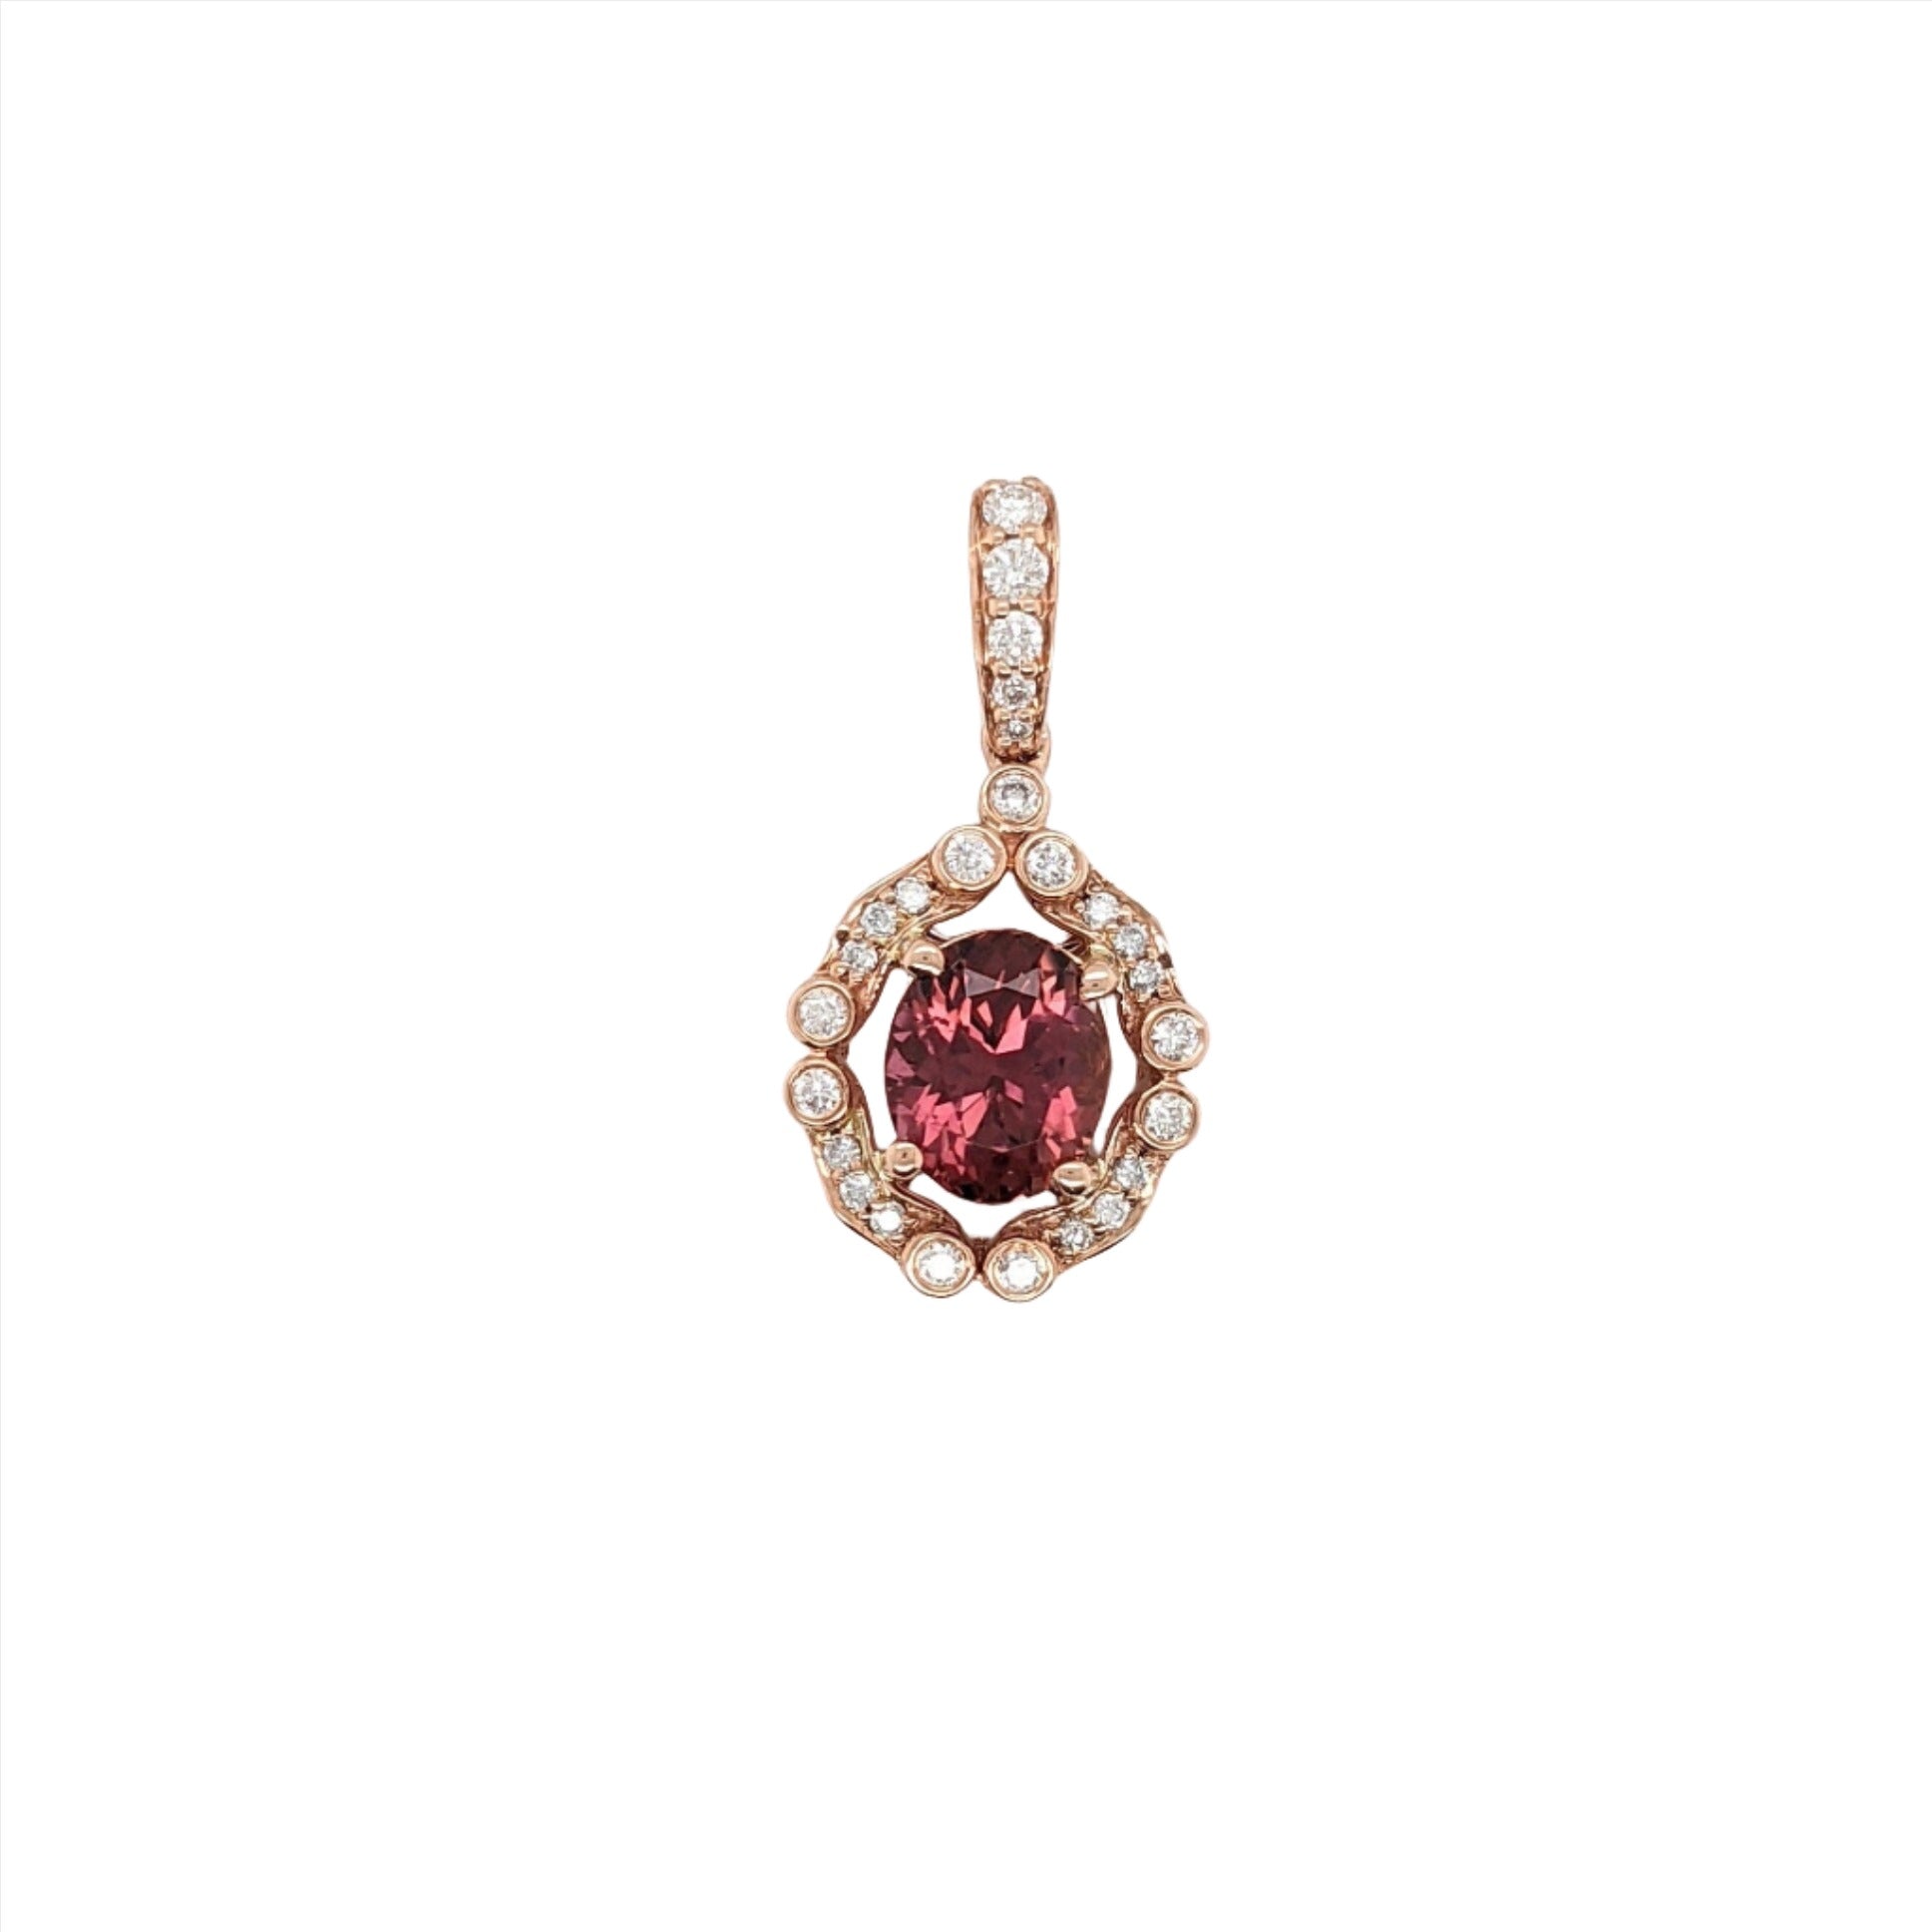 Pendants-Stunning Tourmaline Pendant in Solid 14K Rose Gold with Diamond Accents | Oval 9x7mm | October Birthstone | Diamond Bail | Halo - NNJGemstones